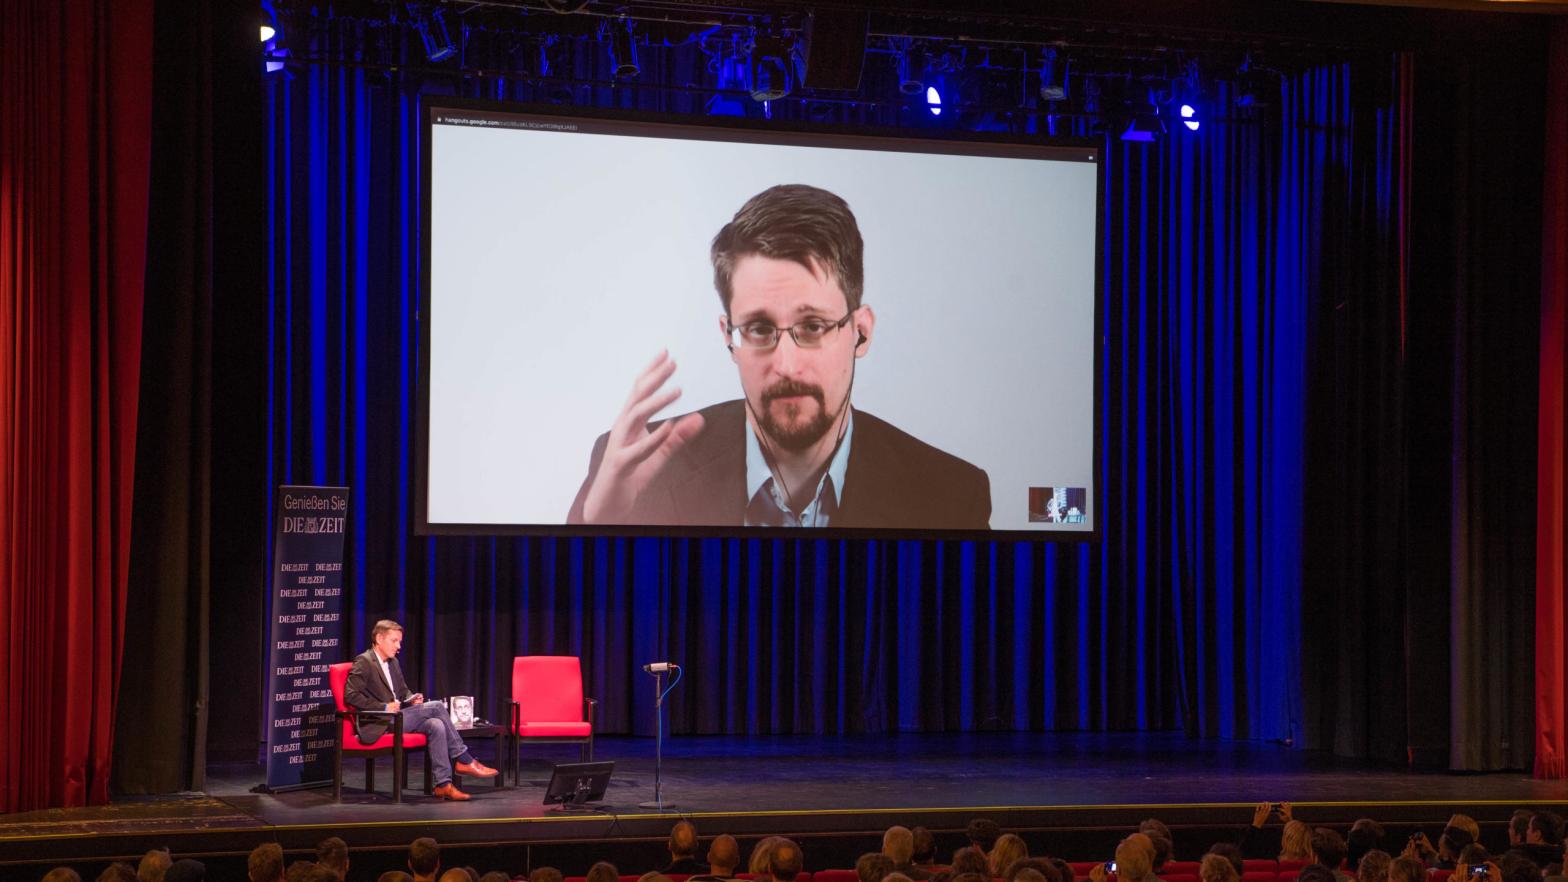 Edward Snowden promoting his book at a 2019 video conference in Berlin. (Photo: Jorg Carstensen/DPA/AFP, Getty Images)